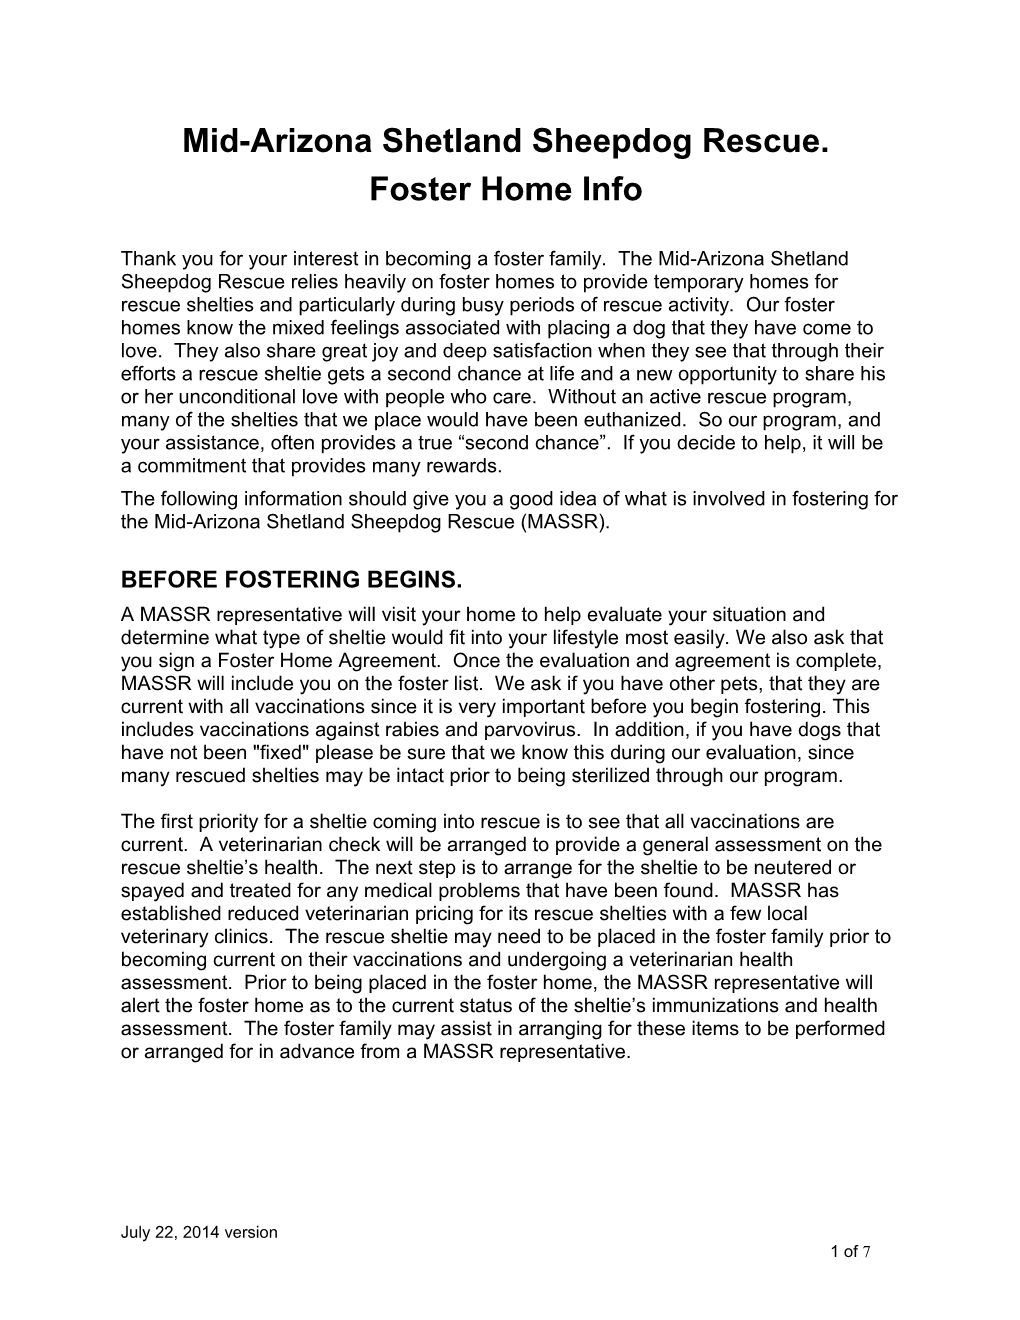 Foster Home Info